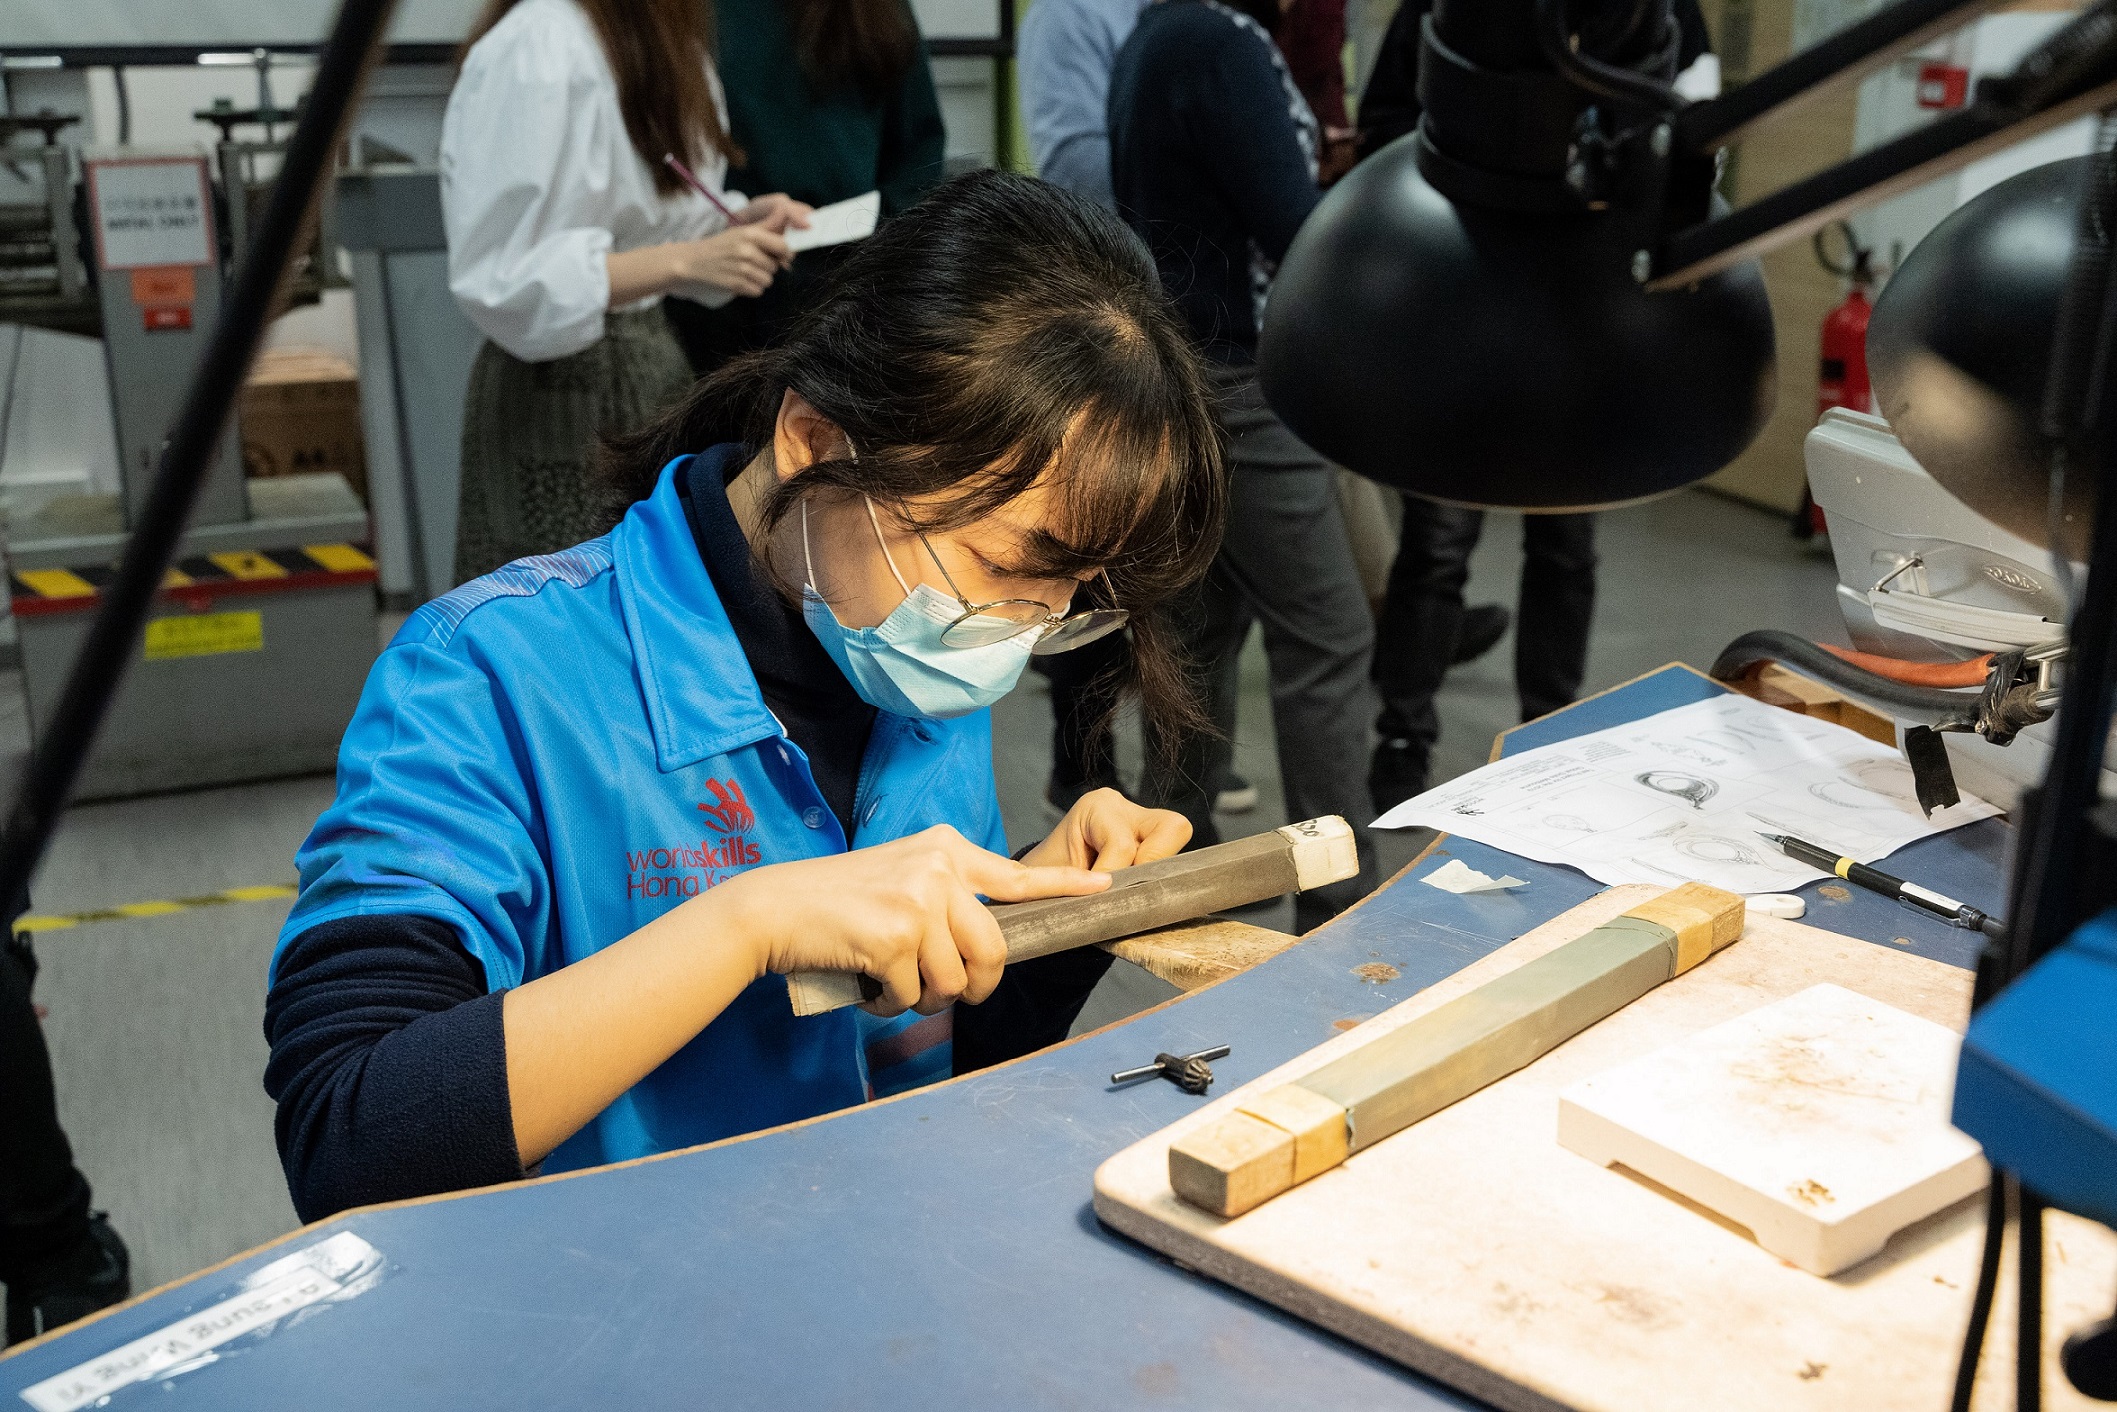 YU Tsz-yi, graduate of the HKDI Higher Diploma in Jewellery Design and Technology programme, is a winner of the “Jewellery” skill in the WorldSkills Hong Kong Competition this year. She receives practical training in a workshop during her internship with a jewellery firm arranged by HKDI